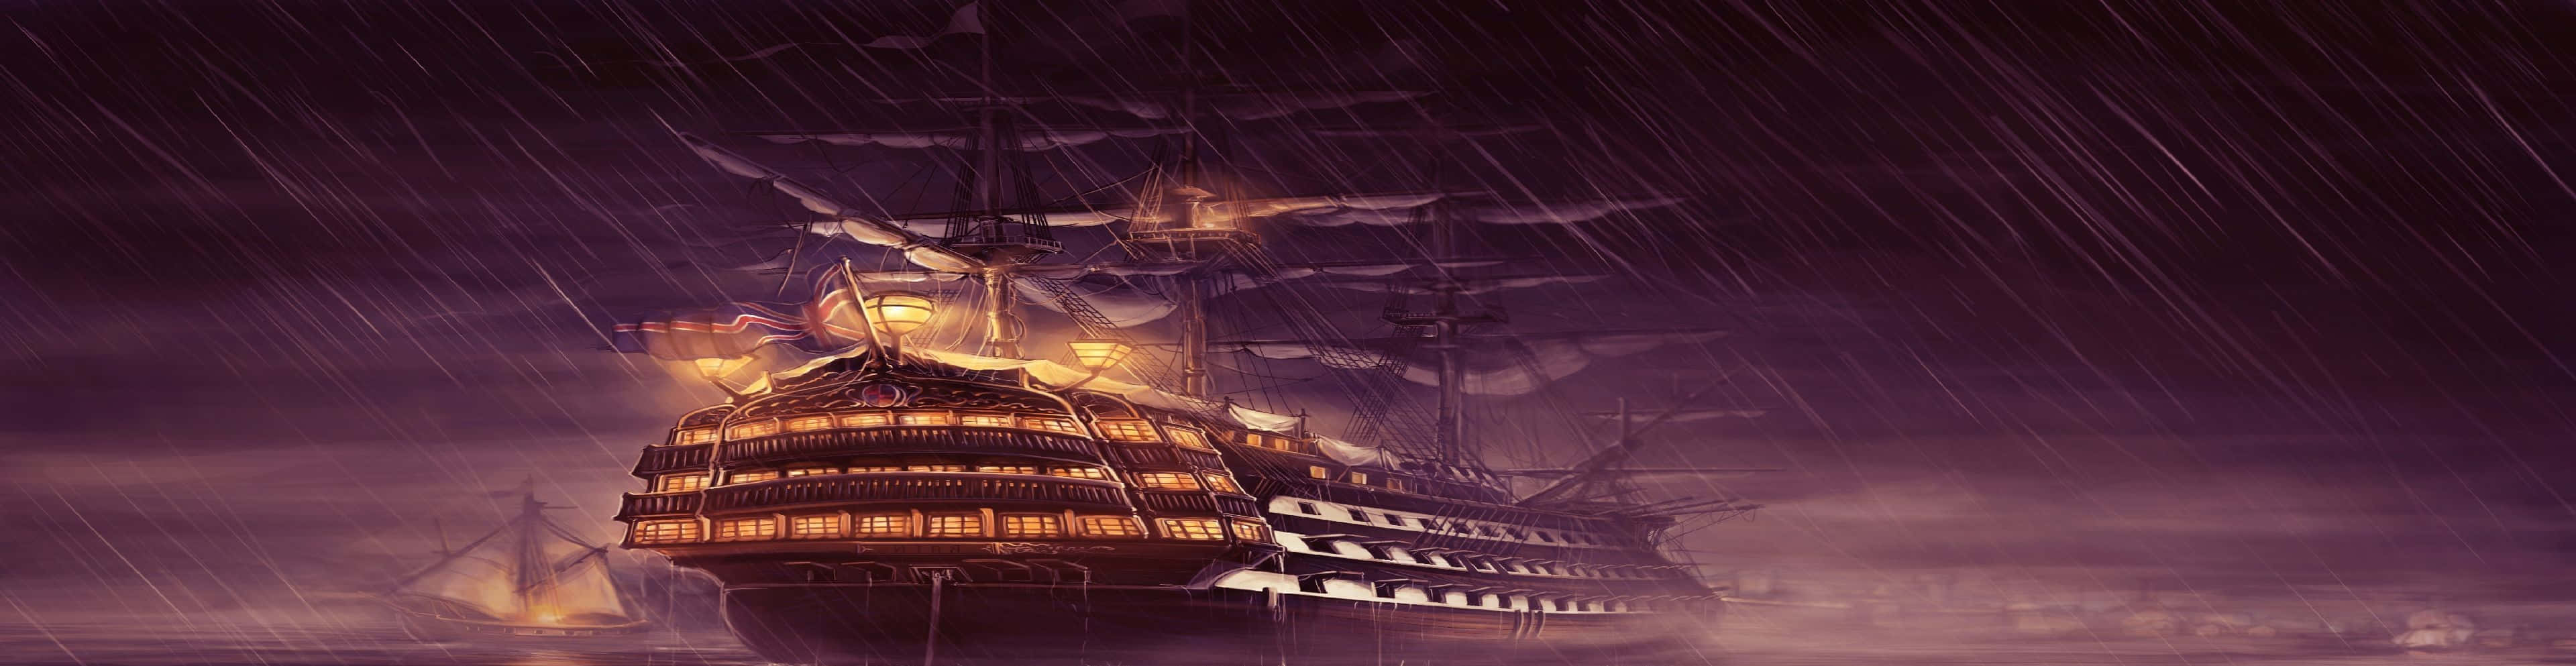 A Pirate Ship In The Rain With A Light On It